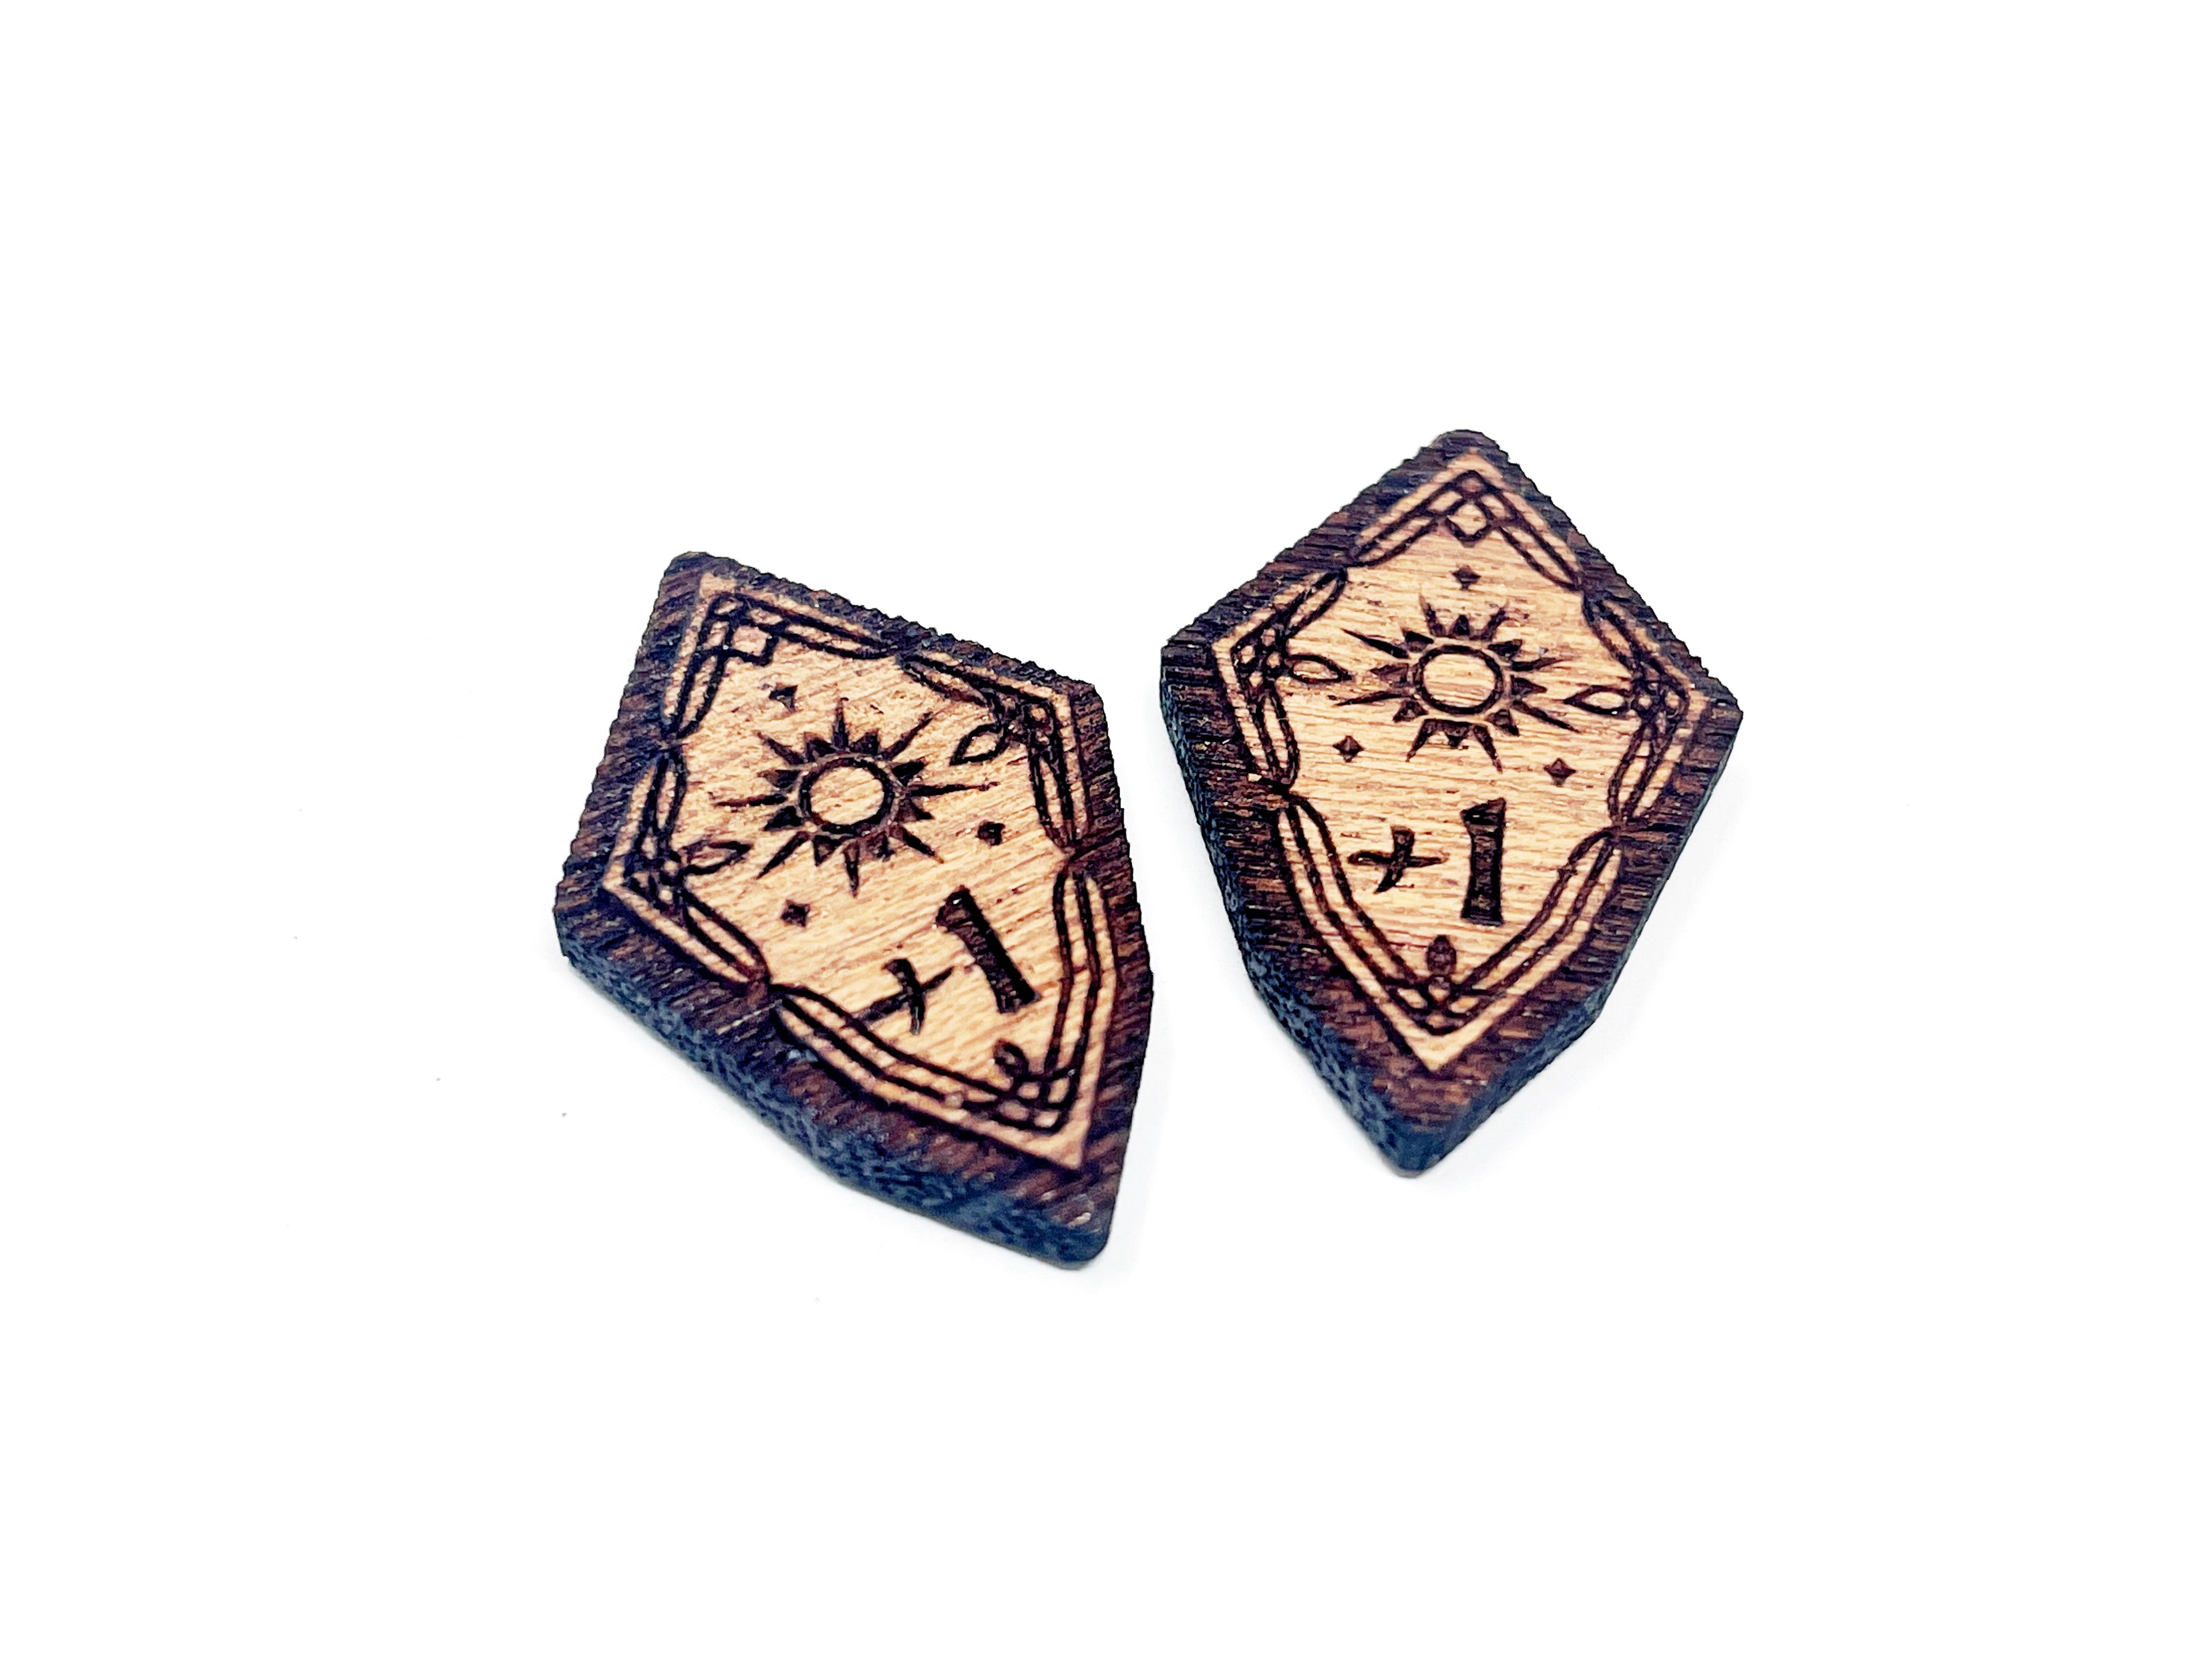 2 x Willpower 1/2 Stat Boost Modifier Tokens - Lord Of The Rings LCG, Solid Mahogany (double sided)